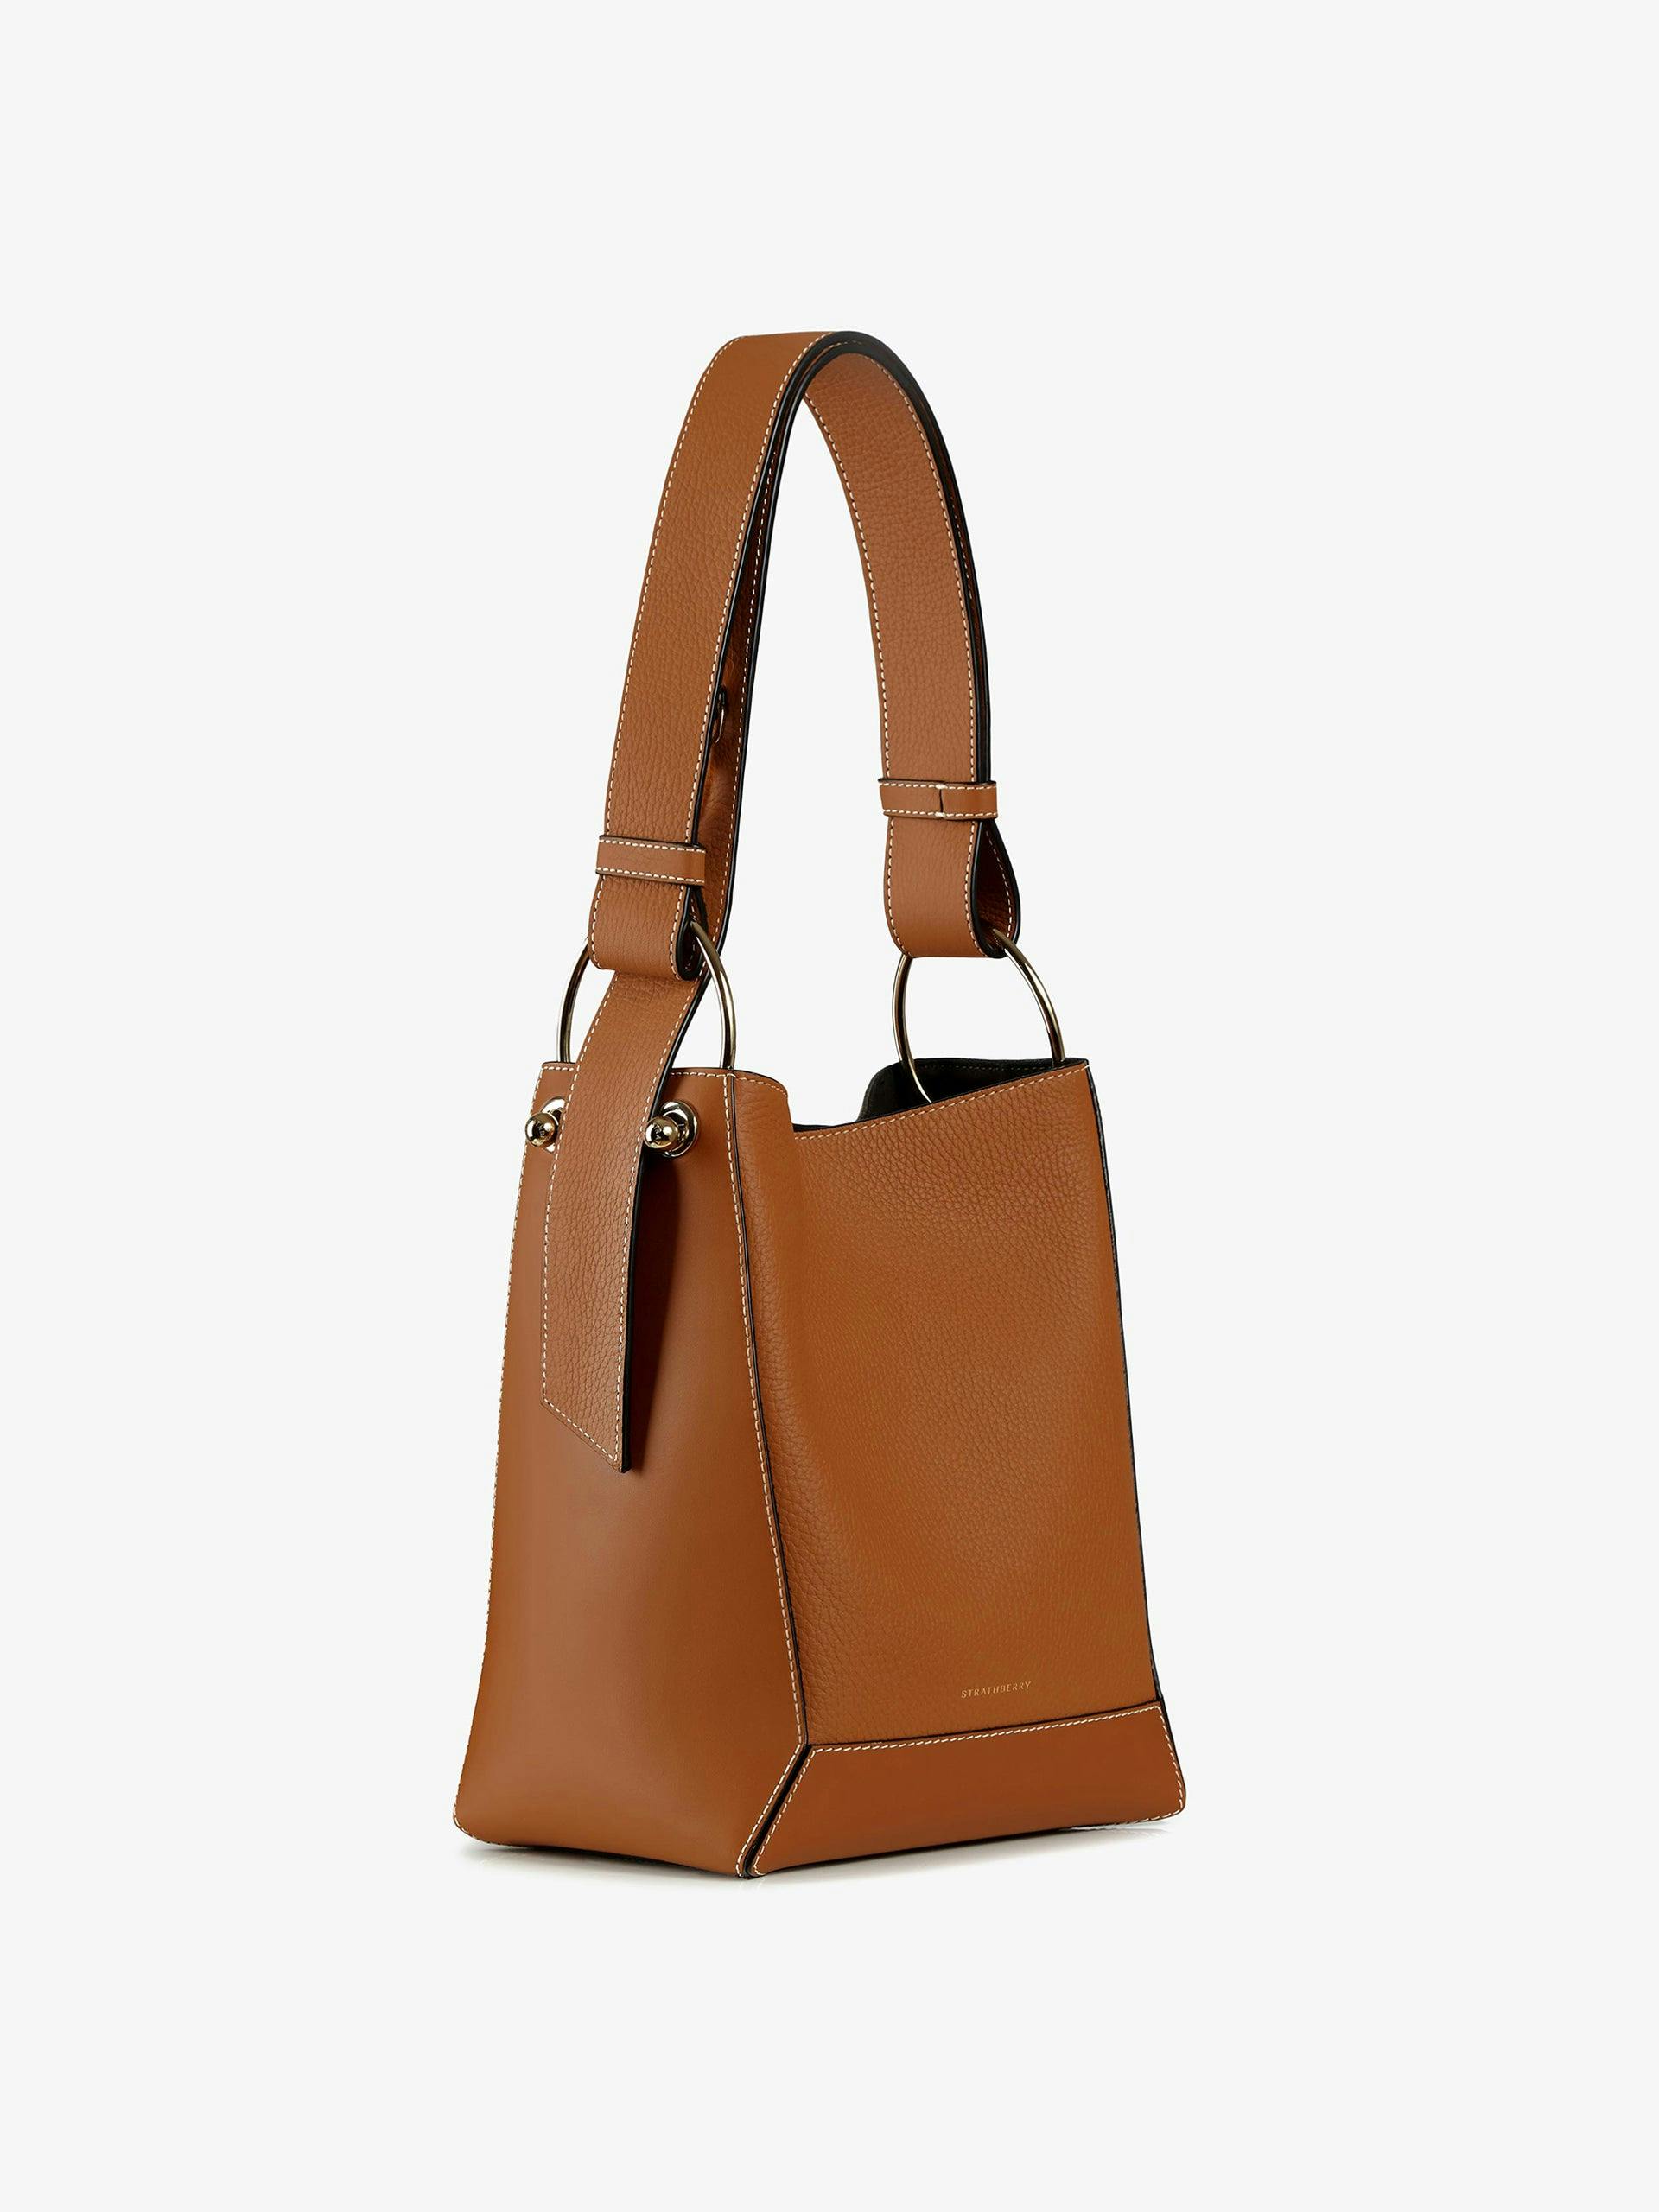 Lana Midi bucket bag in tan leather with white stitching